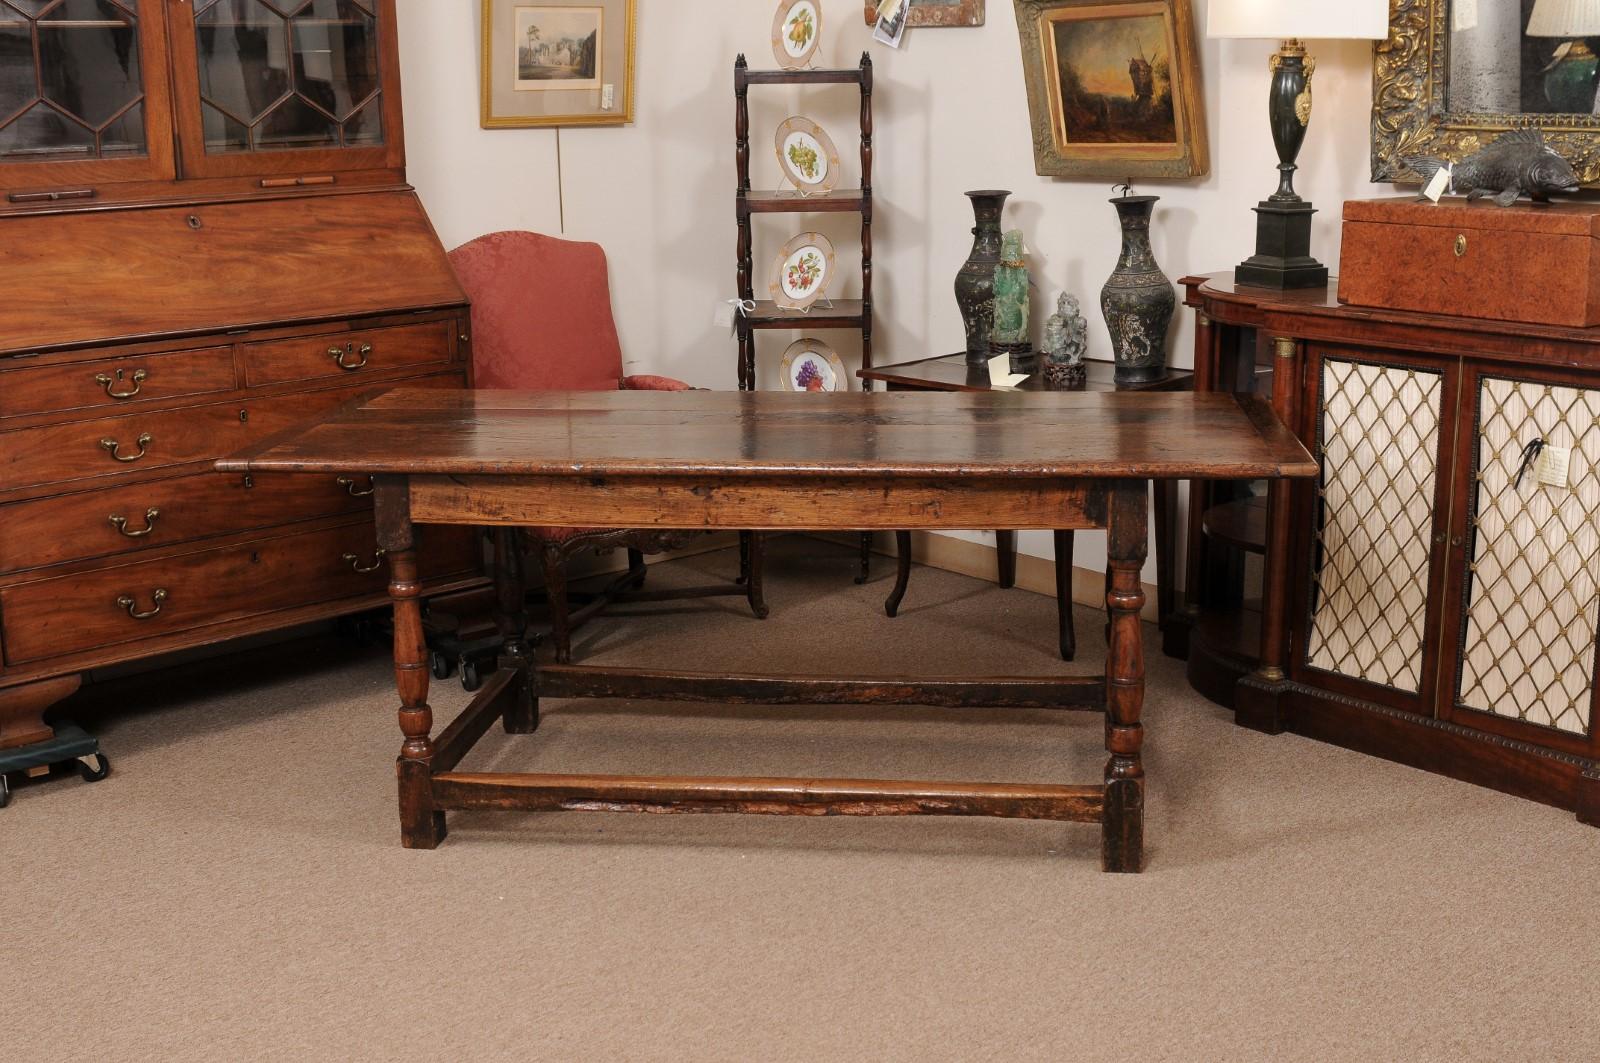  Early 18th Century English Long Oak Hall Table with Carved Frieze, Turned Legs  For Sale 11